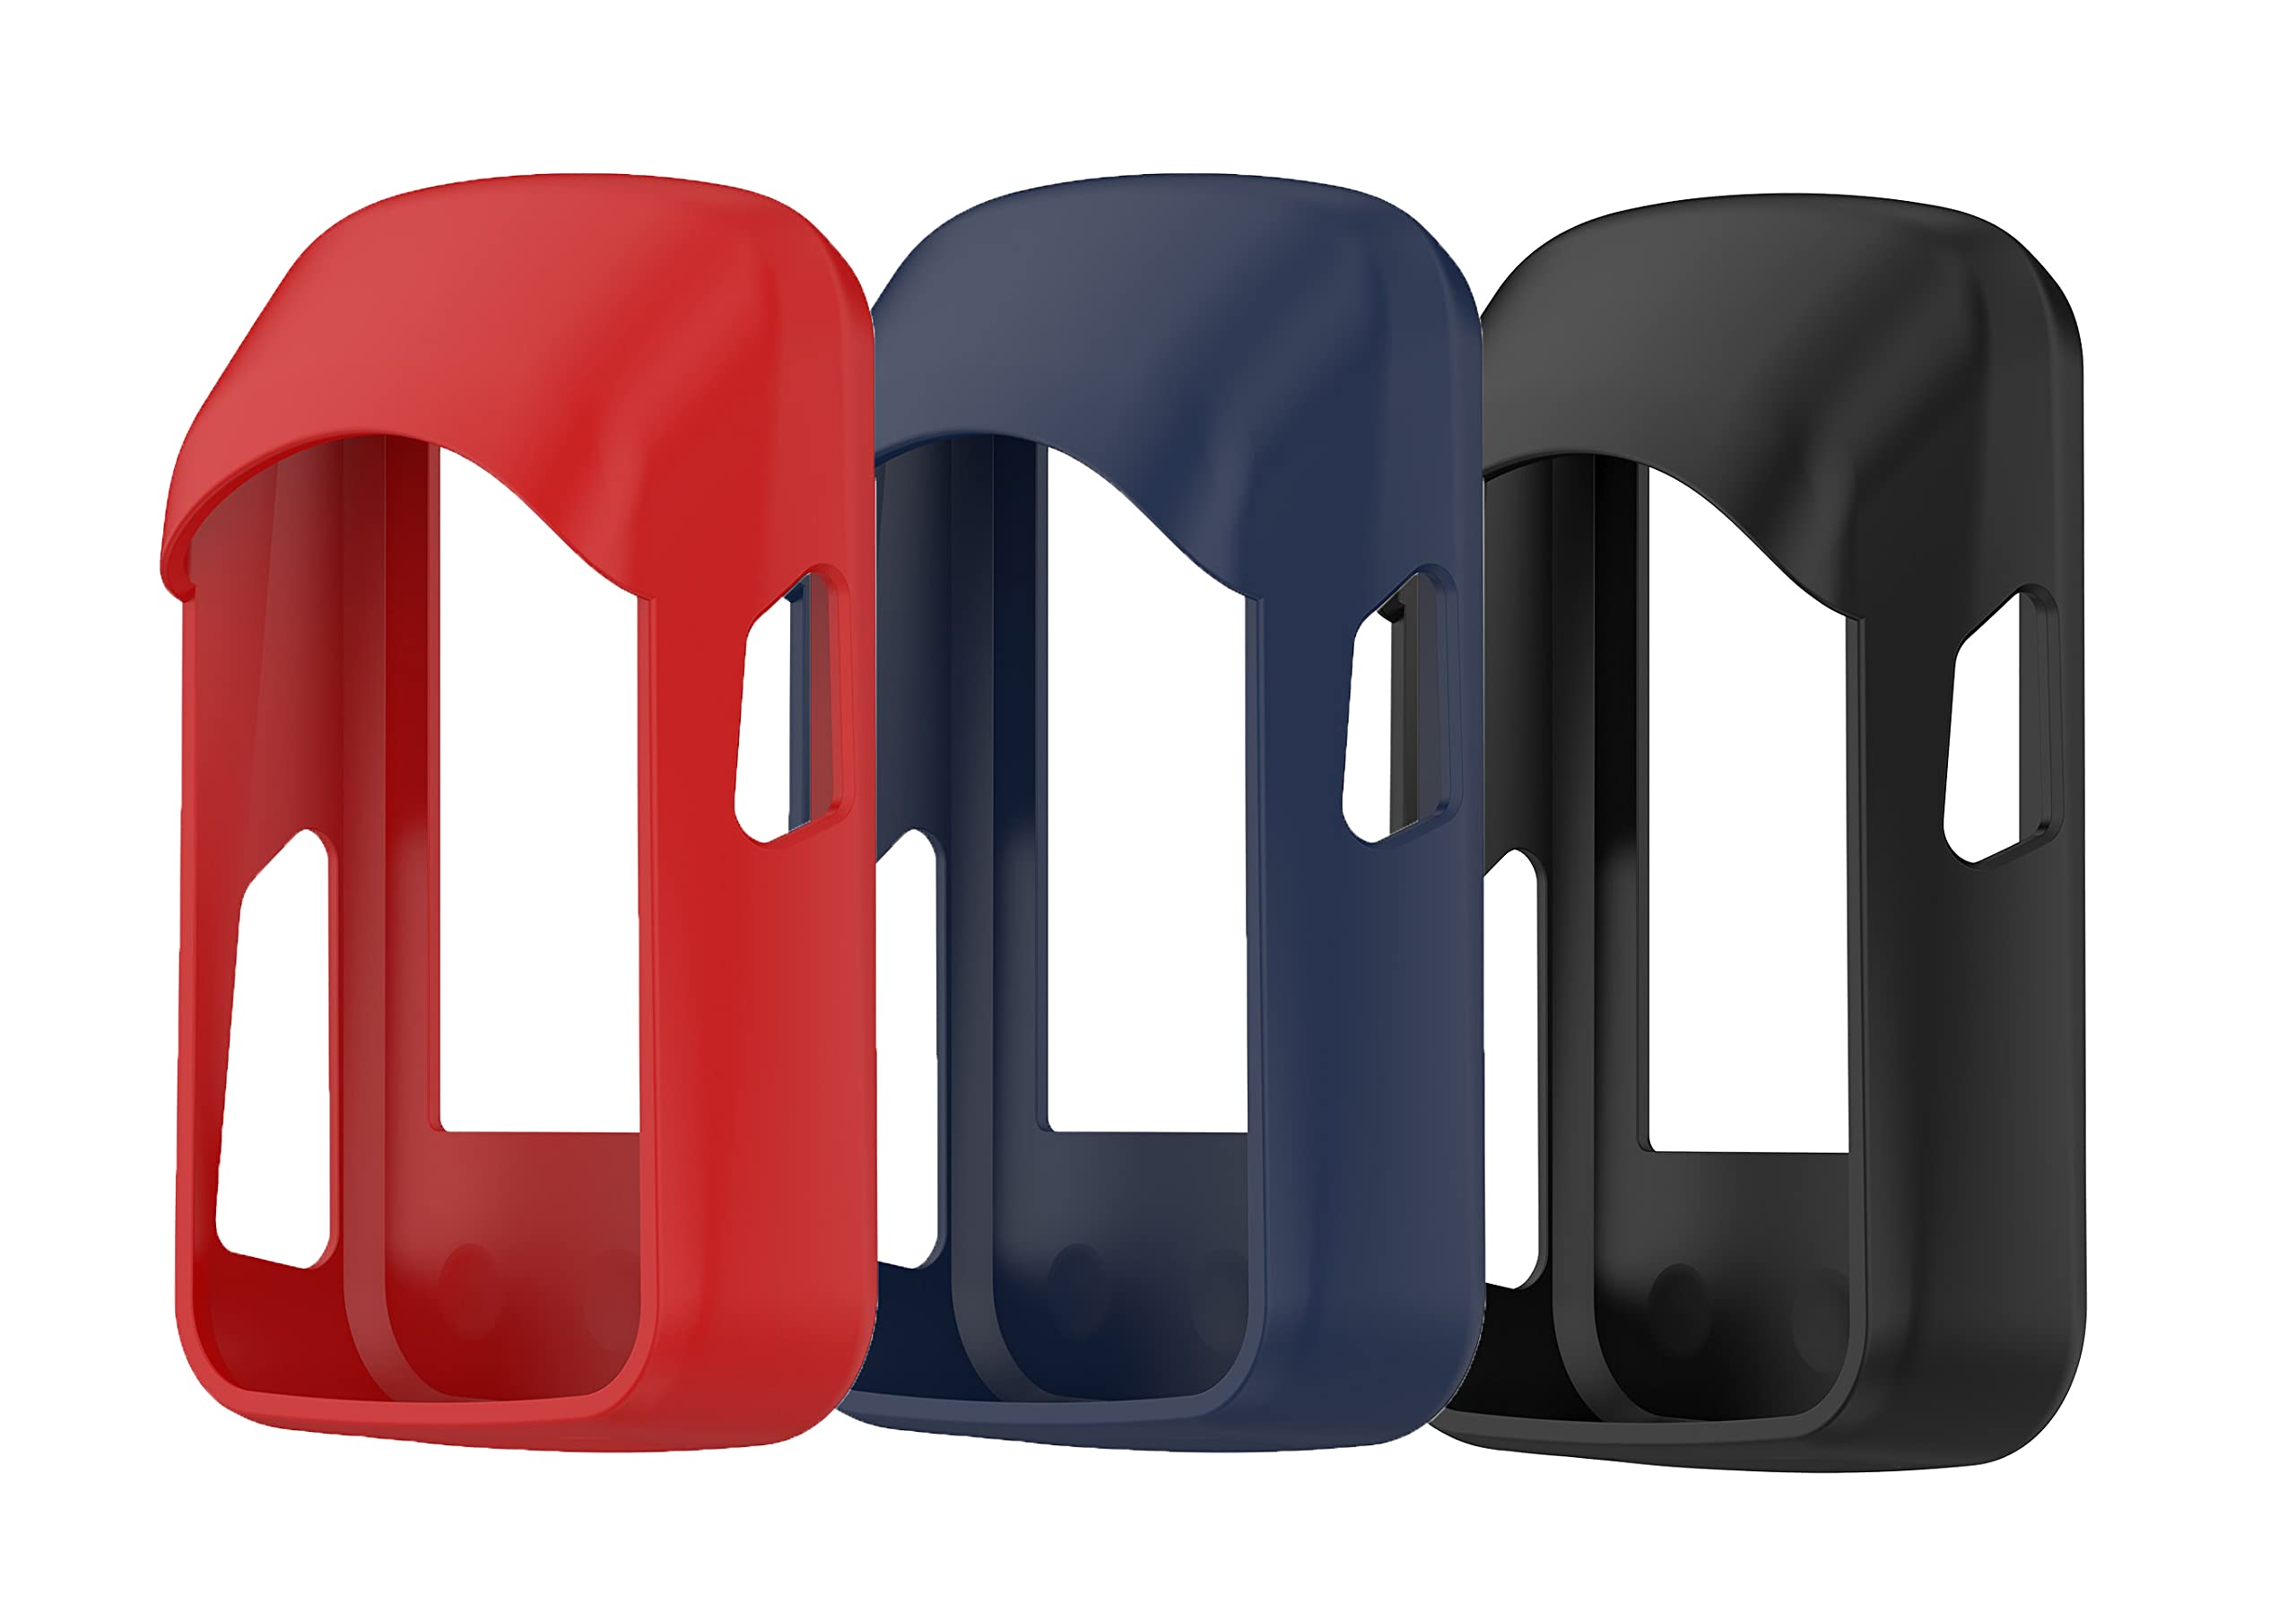 Lemspum Silicone Protective Cases Compatible with Wahoo ELEMNT Bolt V2 (WFCC5) GPS Cycling/Bike Computer Frame Protector Covers (Black&Navy&Red)